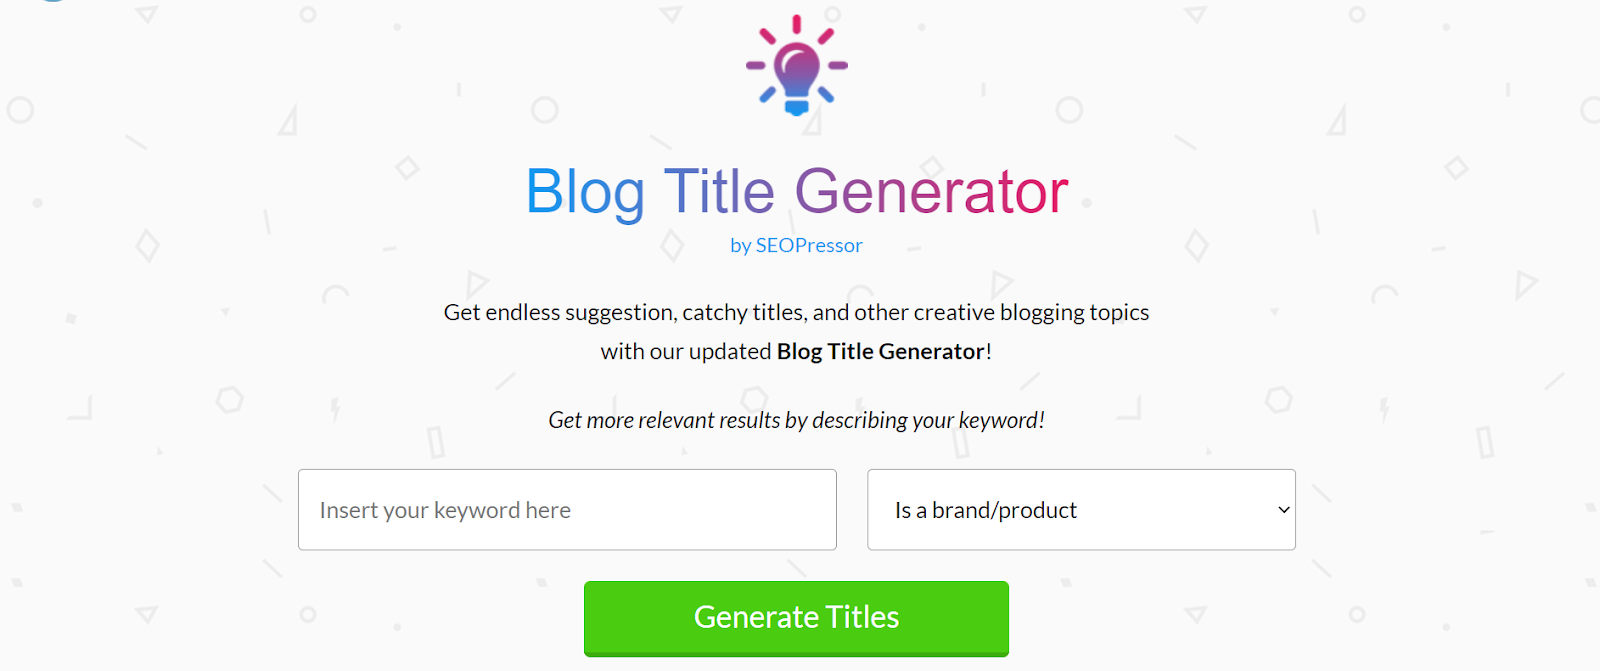 Blog Title Generator - a great title generator for blogs